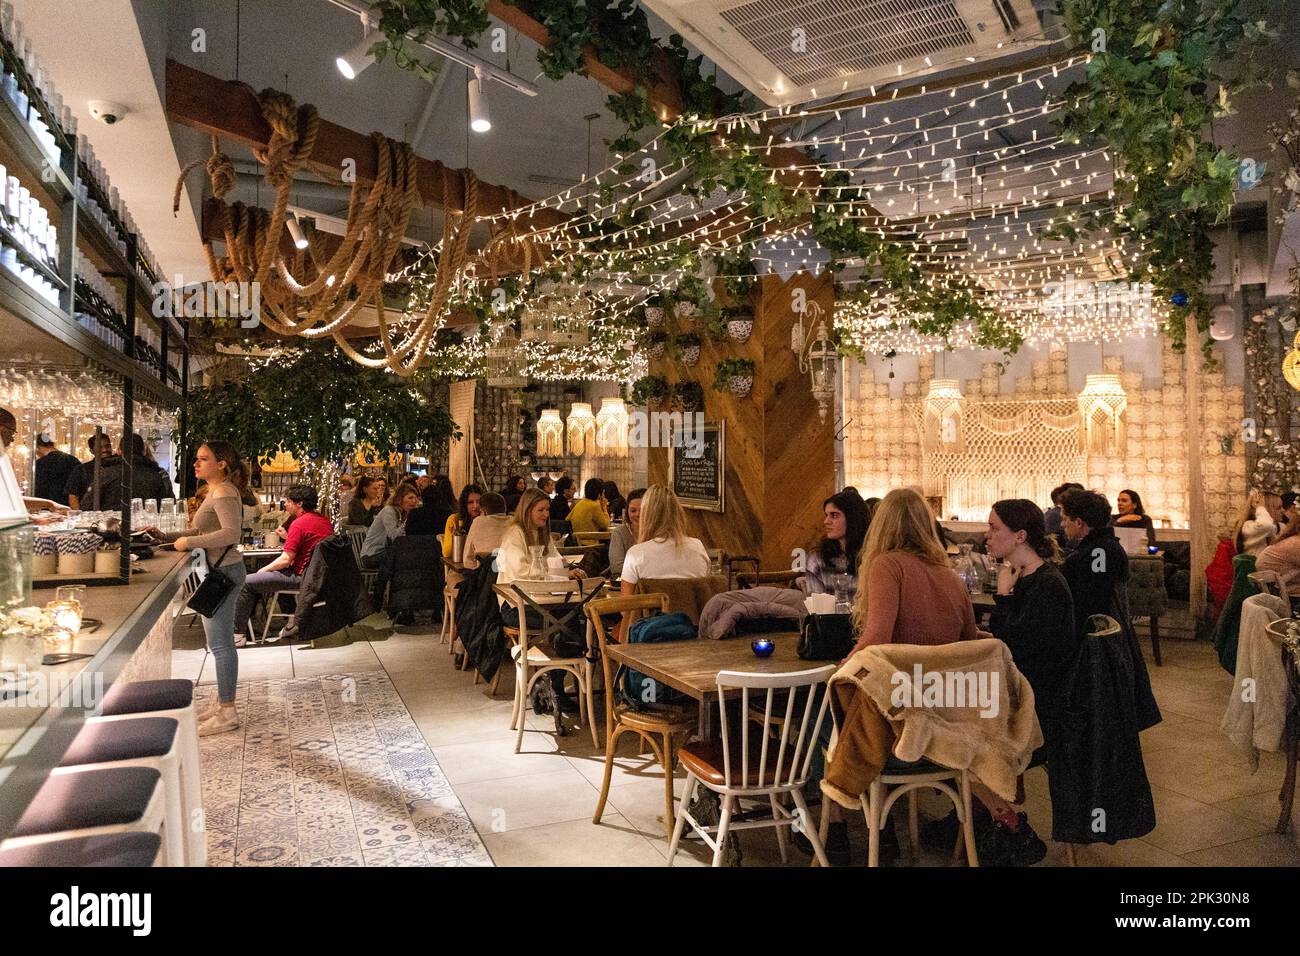 Mediterranean style interior in Megan's at the Battersea Power Station, London, UK Stock Photo